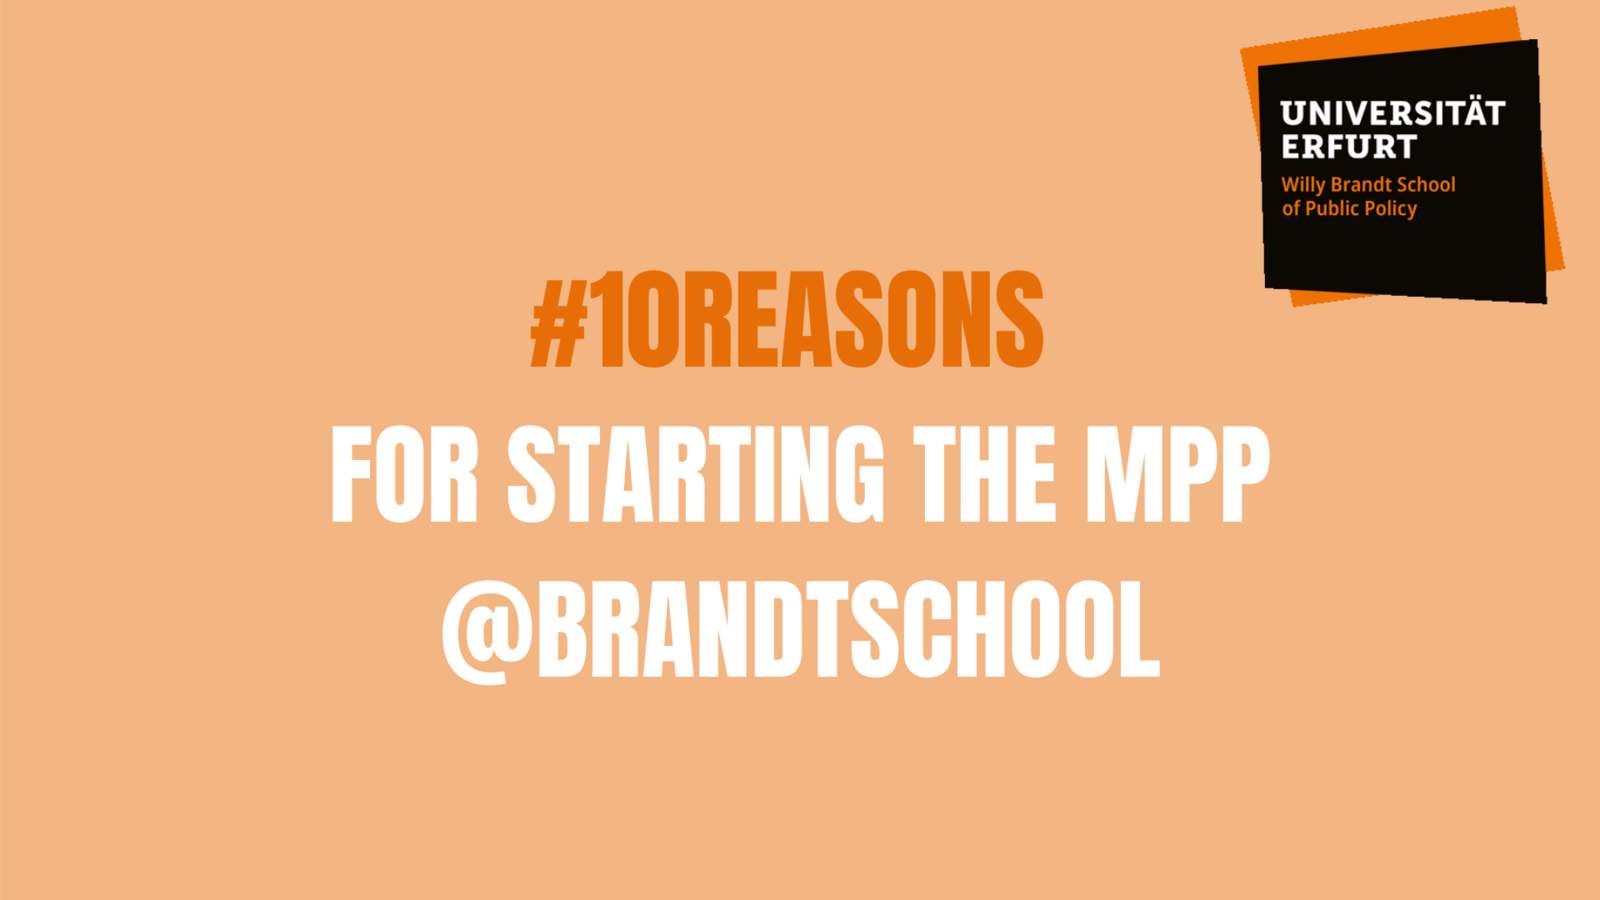 10 reasons for starting the MPP